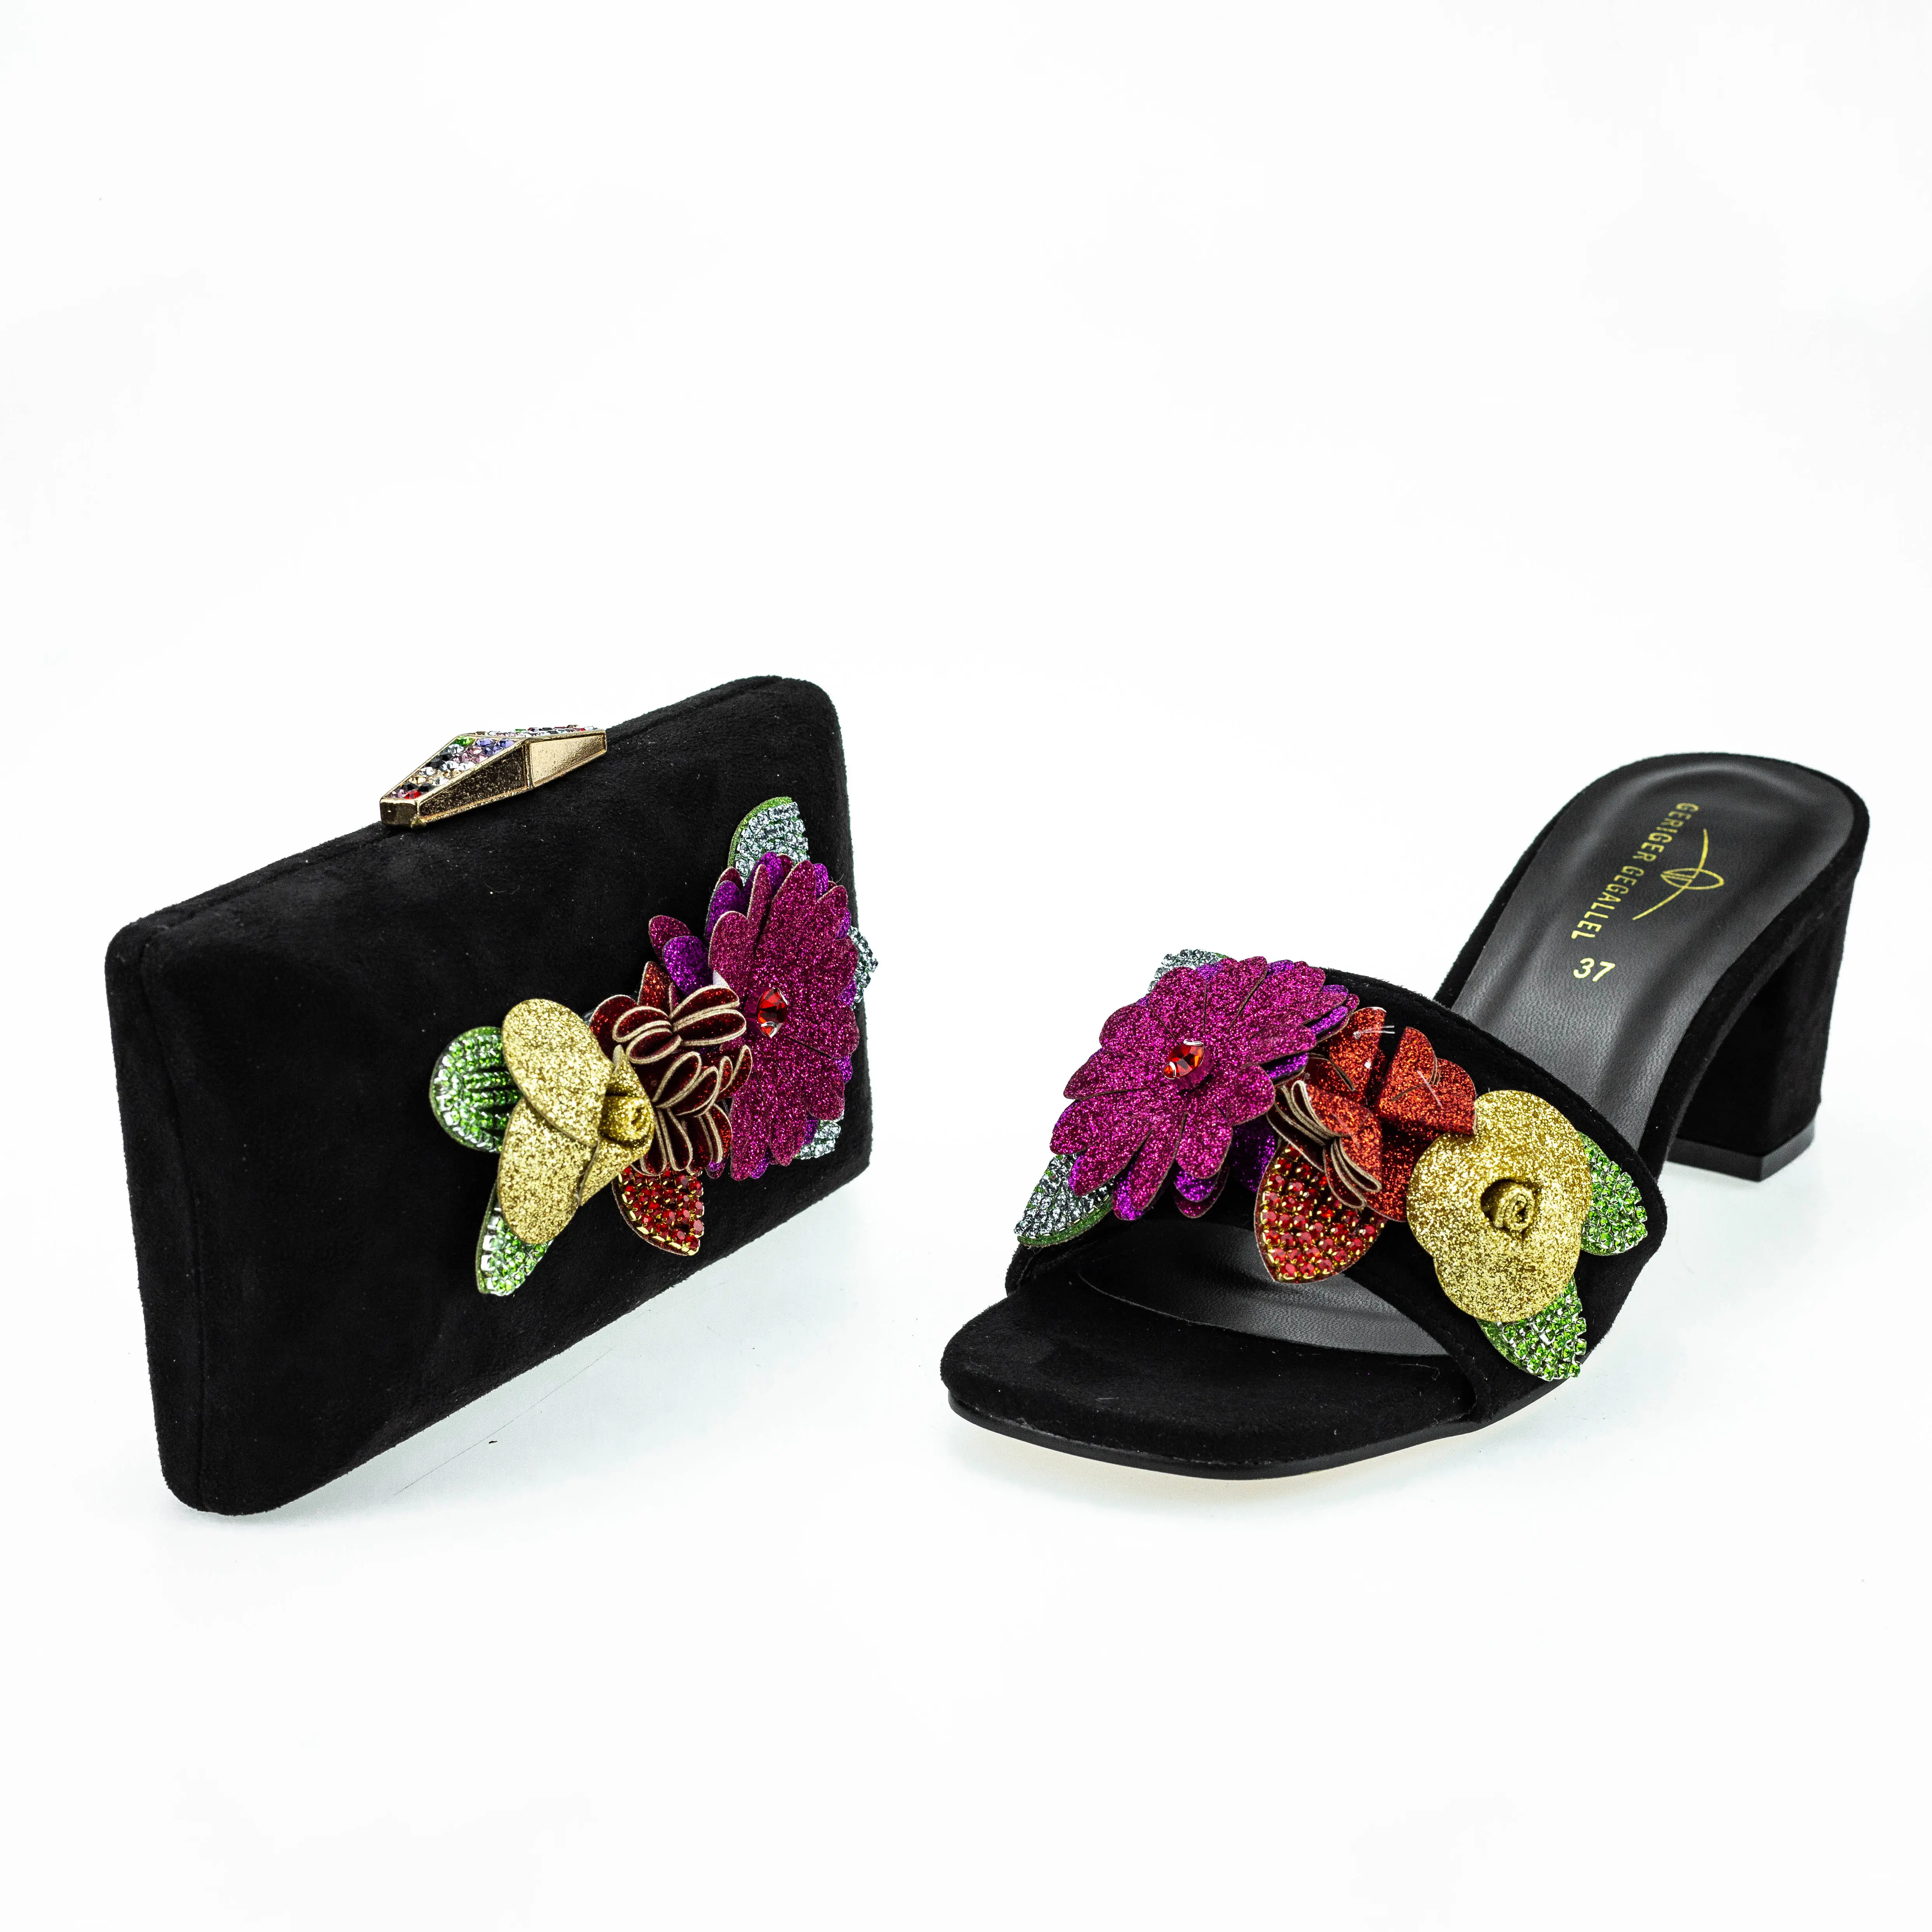 OEM 2021 Latest Floral Design Italian Woman Black Chunky Heel Sandal Shoes Mules Flat Heeled Sandals For Nigeria Party